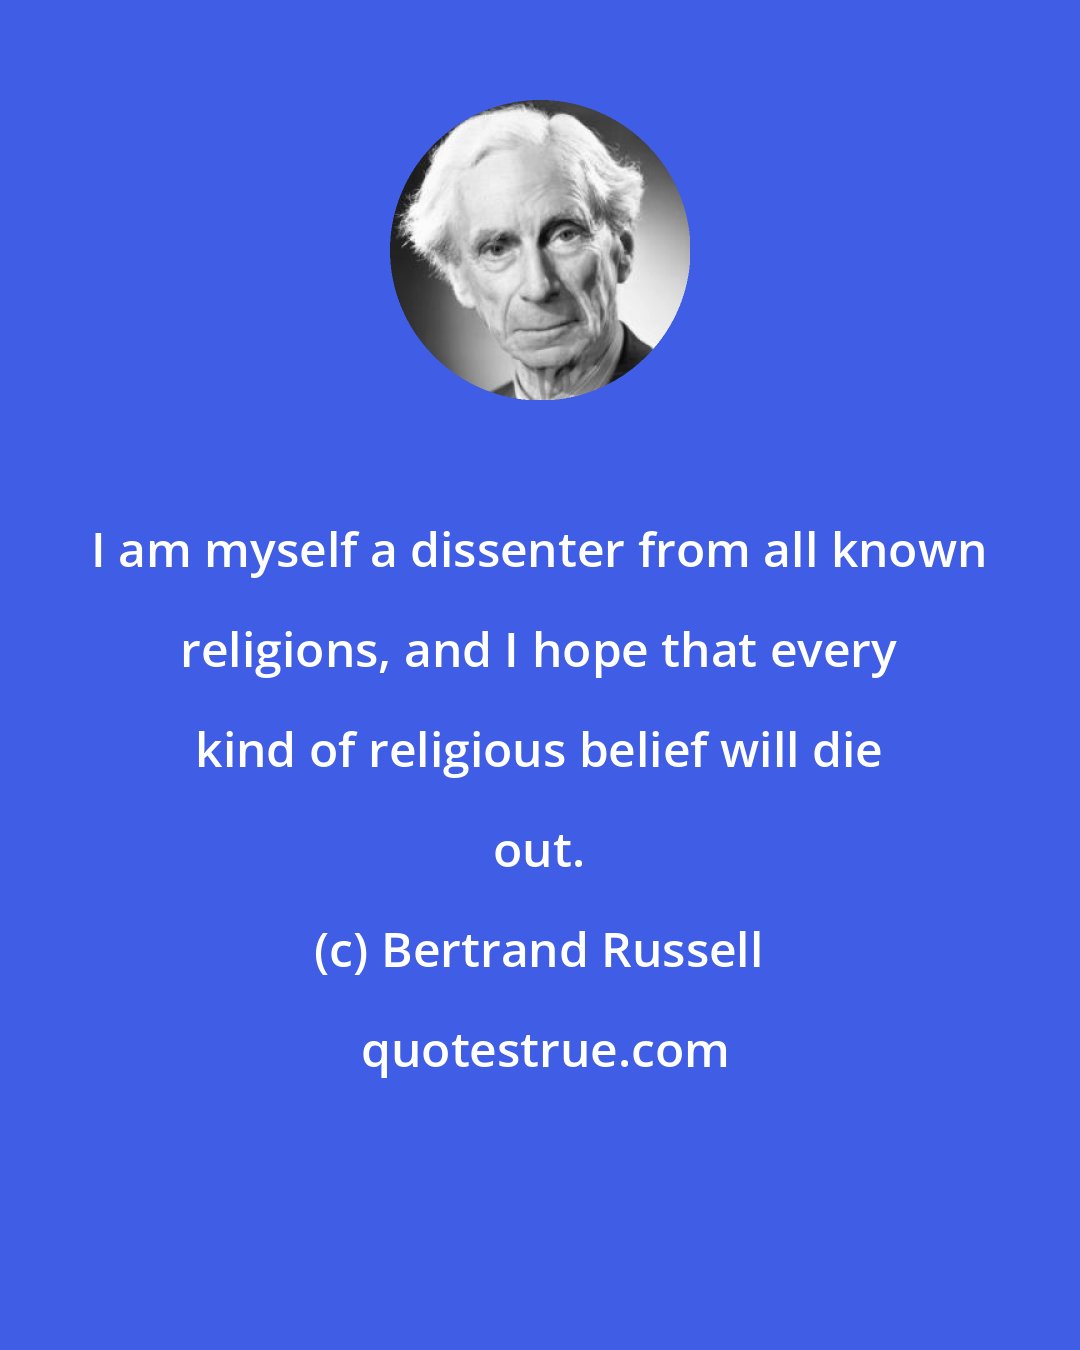 Bertrand Russell: I am myself a dissenter from all known religions, and I hope that every kind of religious belief will die out.